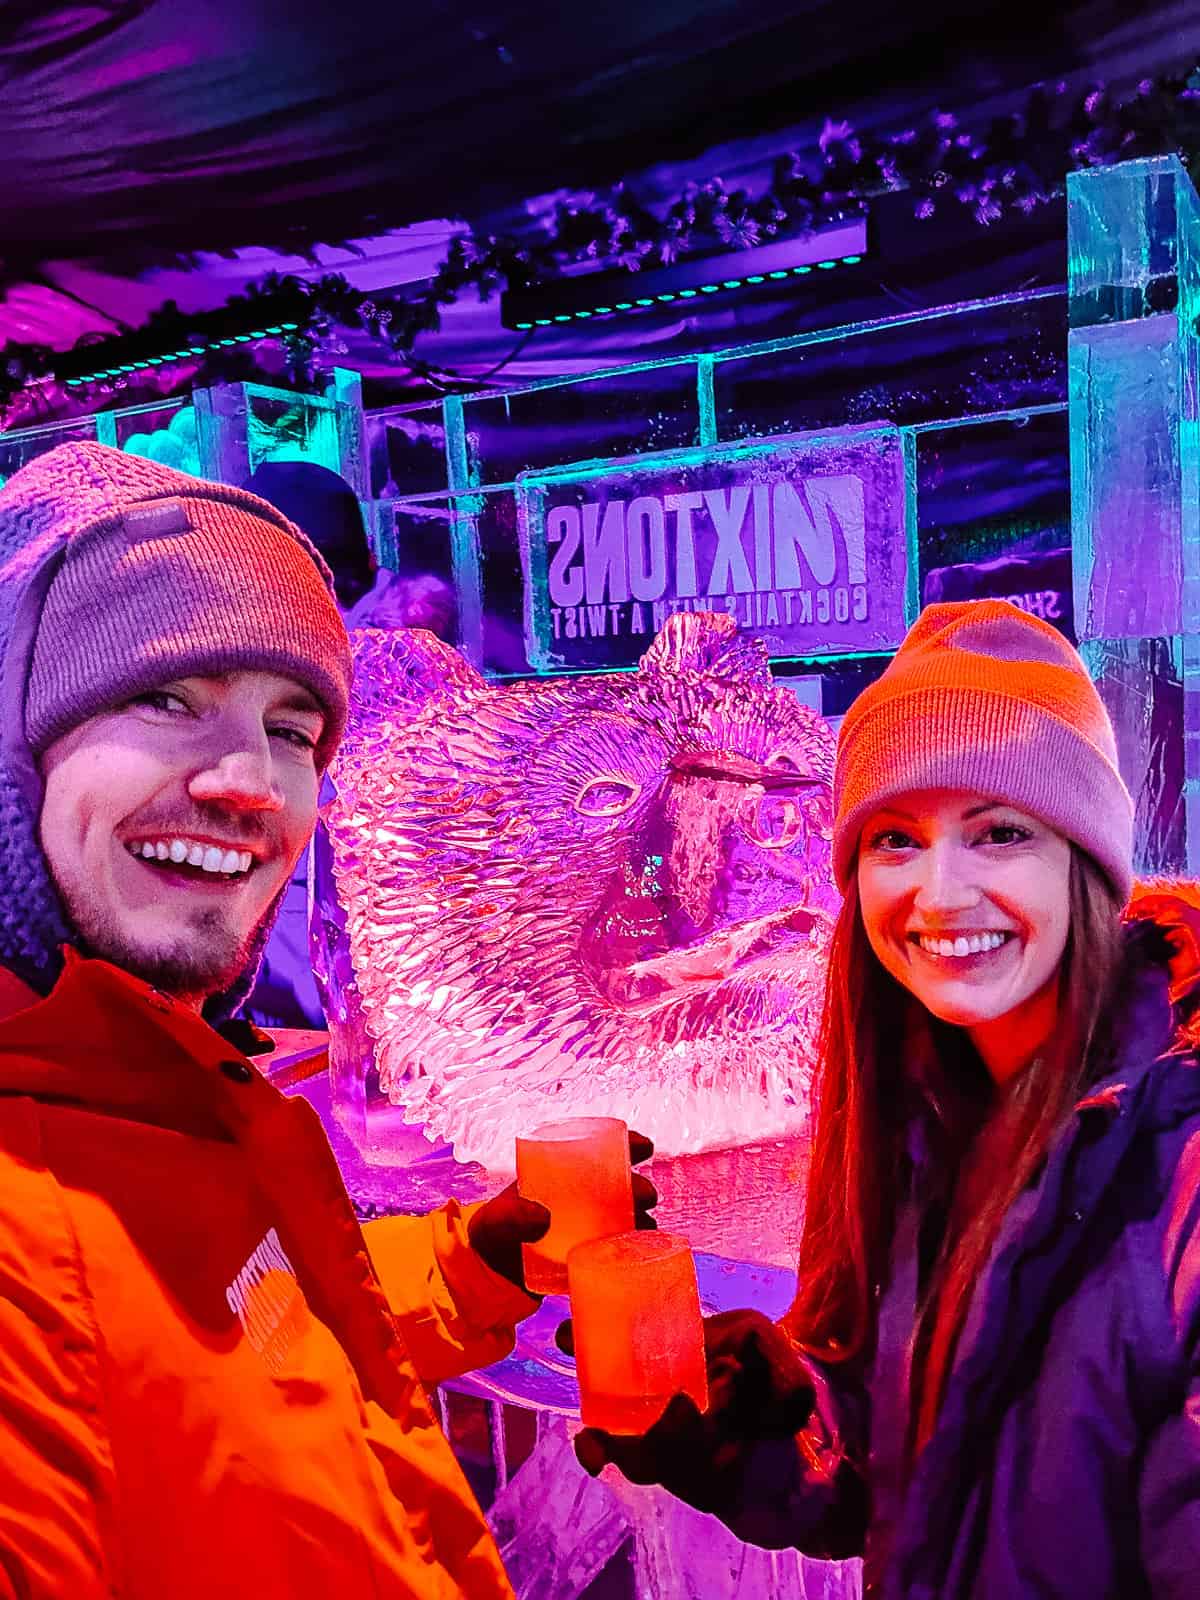 A man and woman share a toast with drinks in ice glasses, surrounded by the glowing purple ambiance of an ice bar